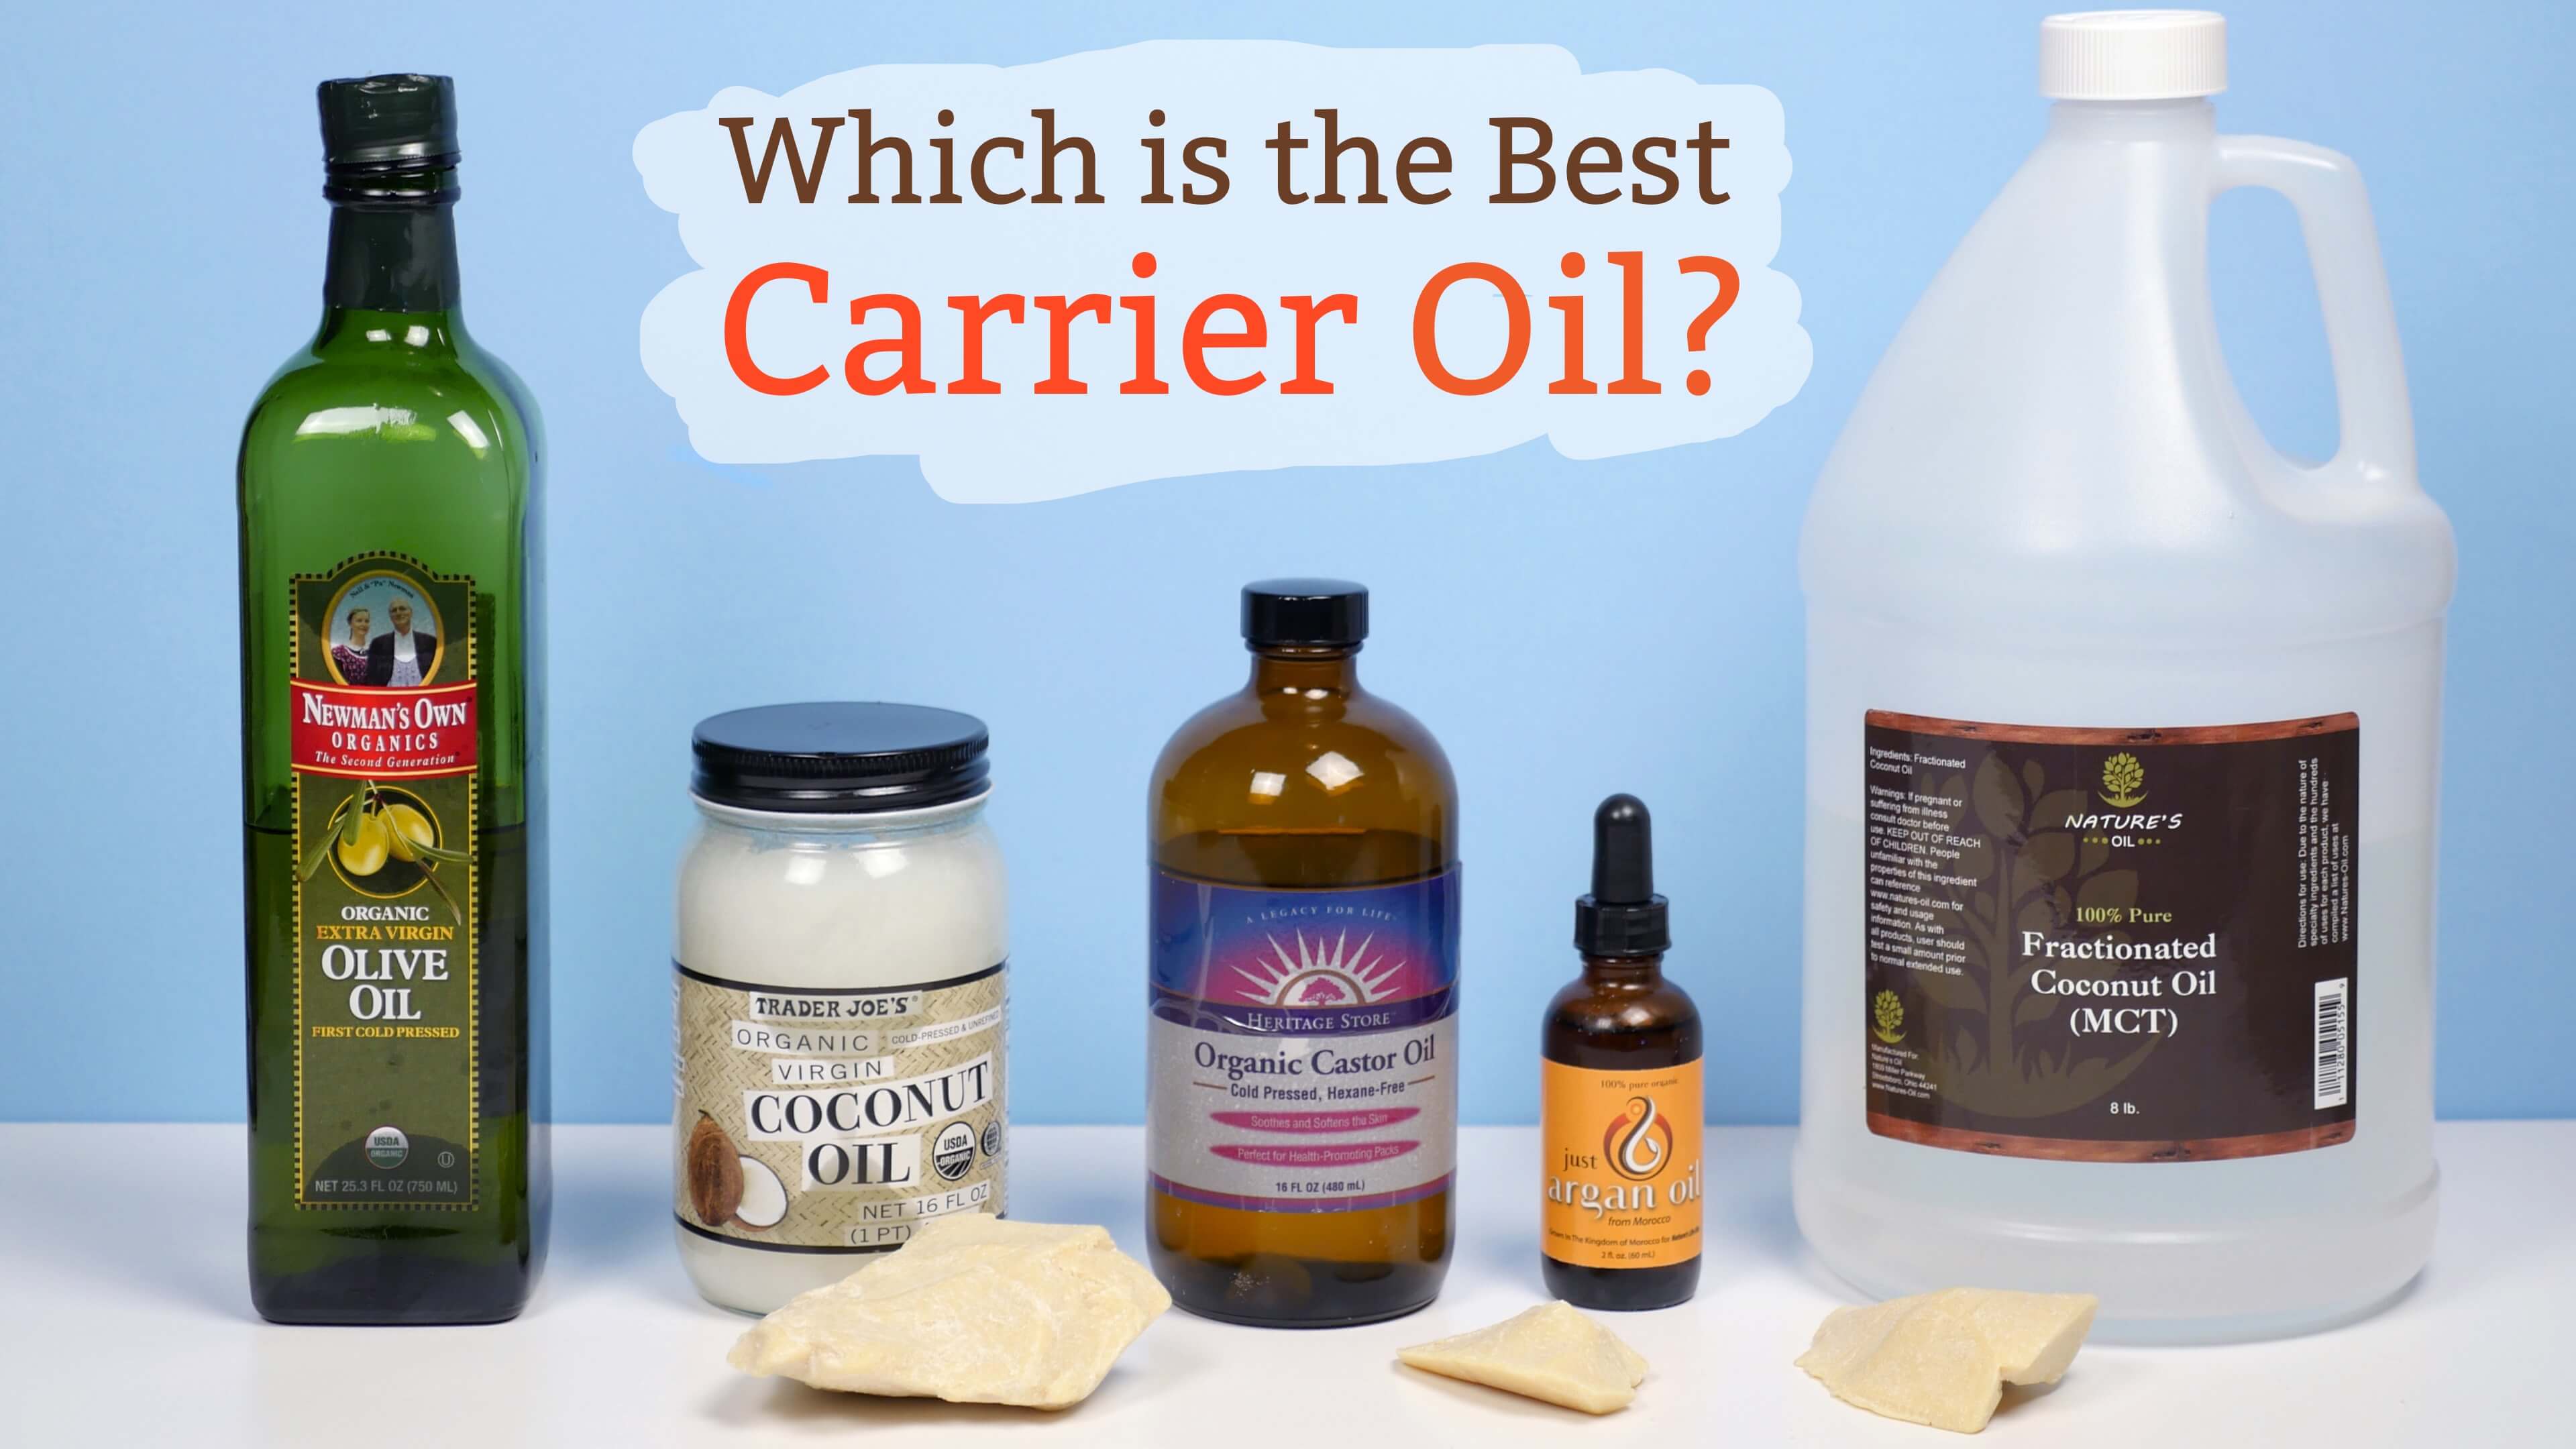 Which is the Best Carrier Oil?